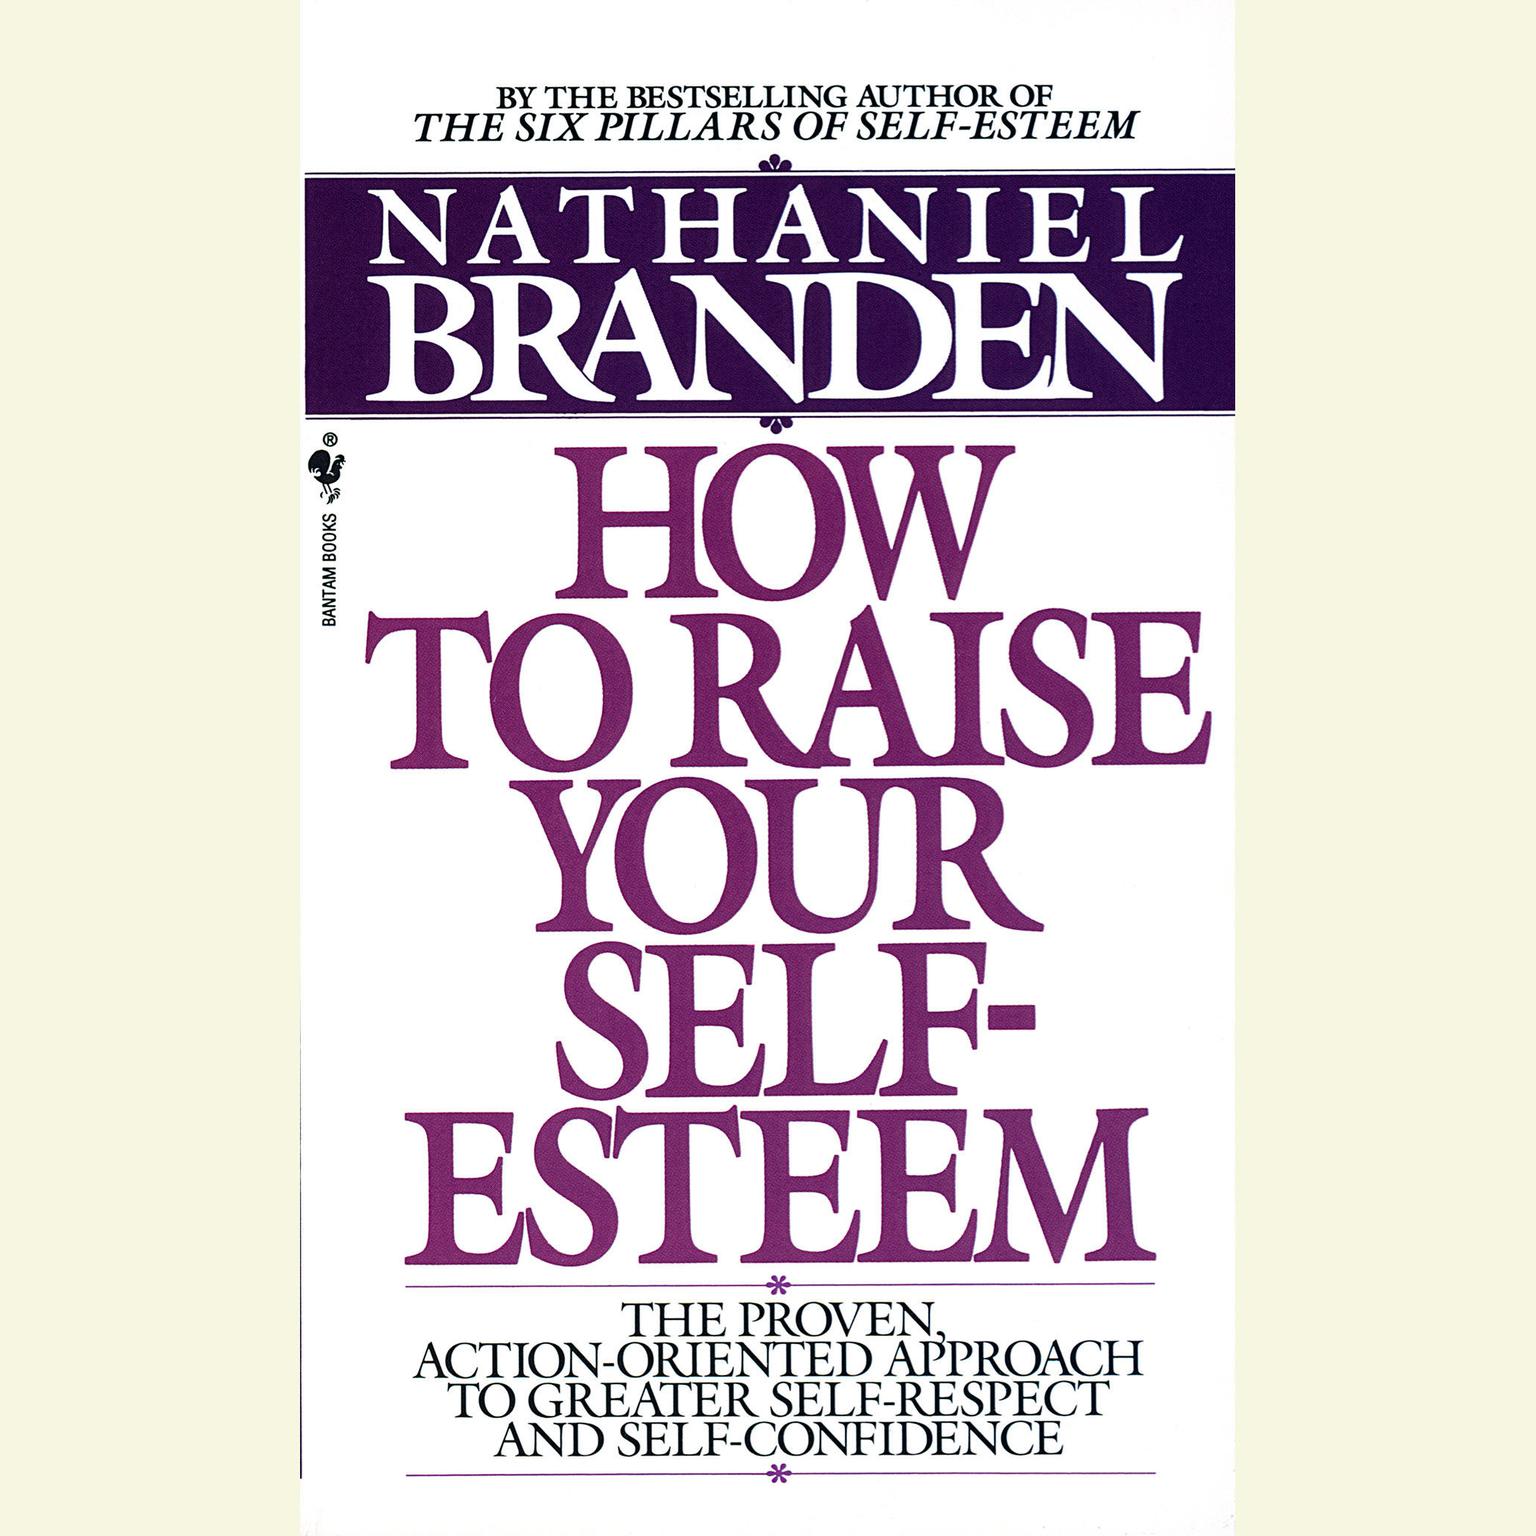 How to Raise Your Self-Esteem (Abridged): The Proven Action-Oriented Approach to Greater Self-Respect and Self-Confidence Audiobook, by Nathaniel Branden